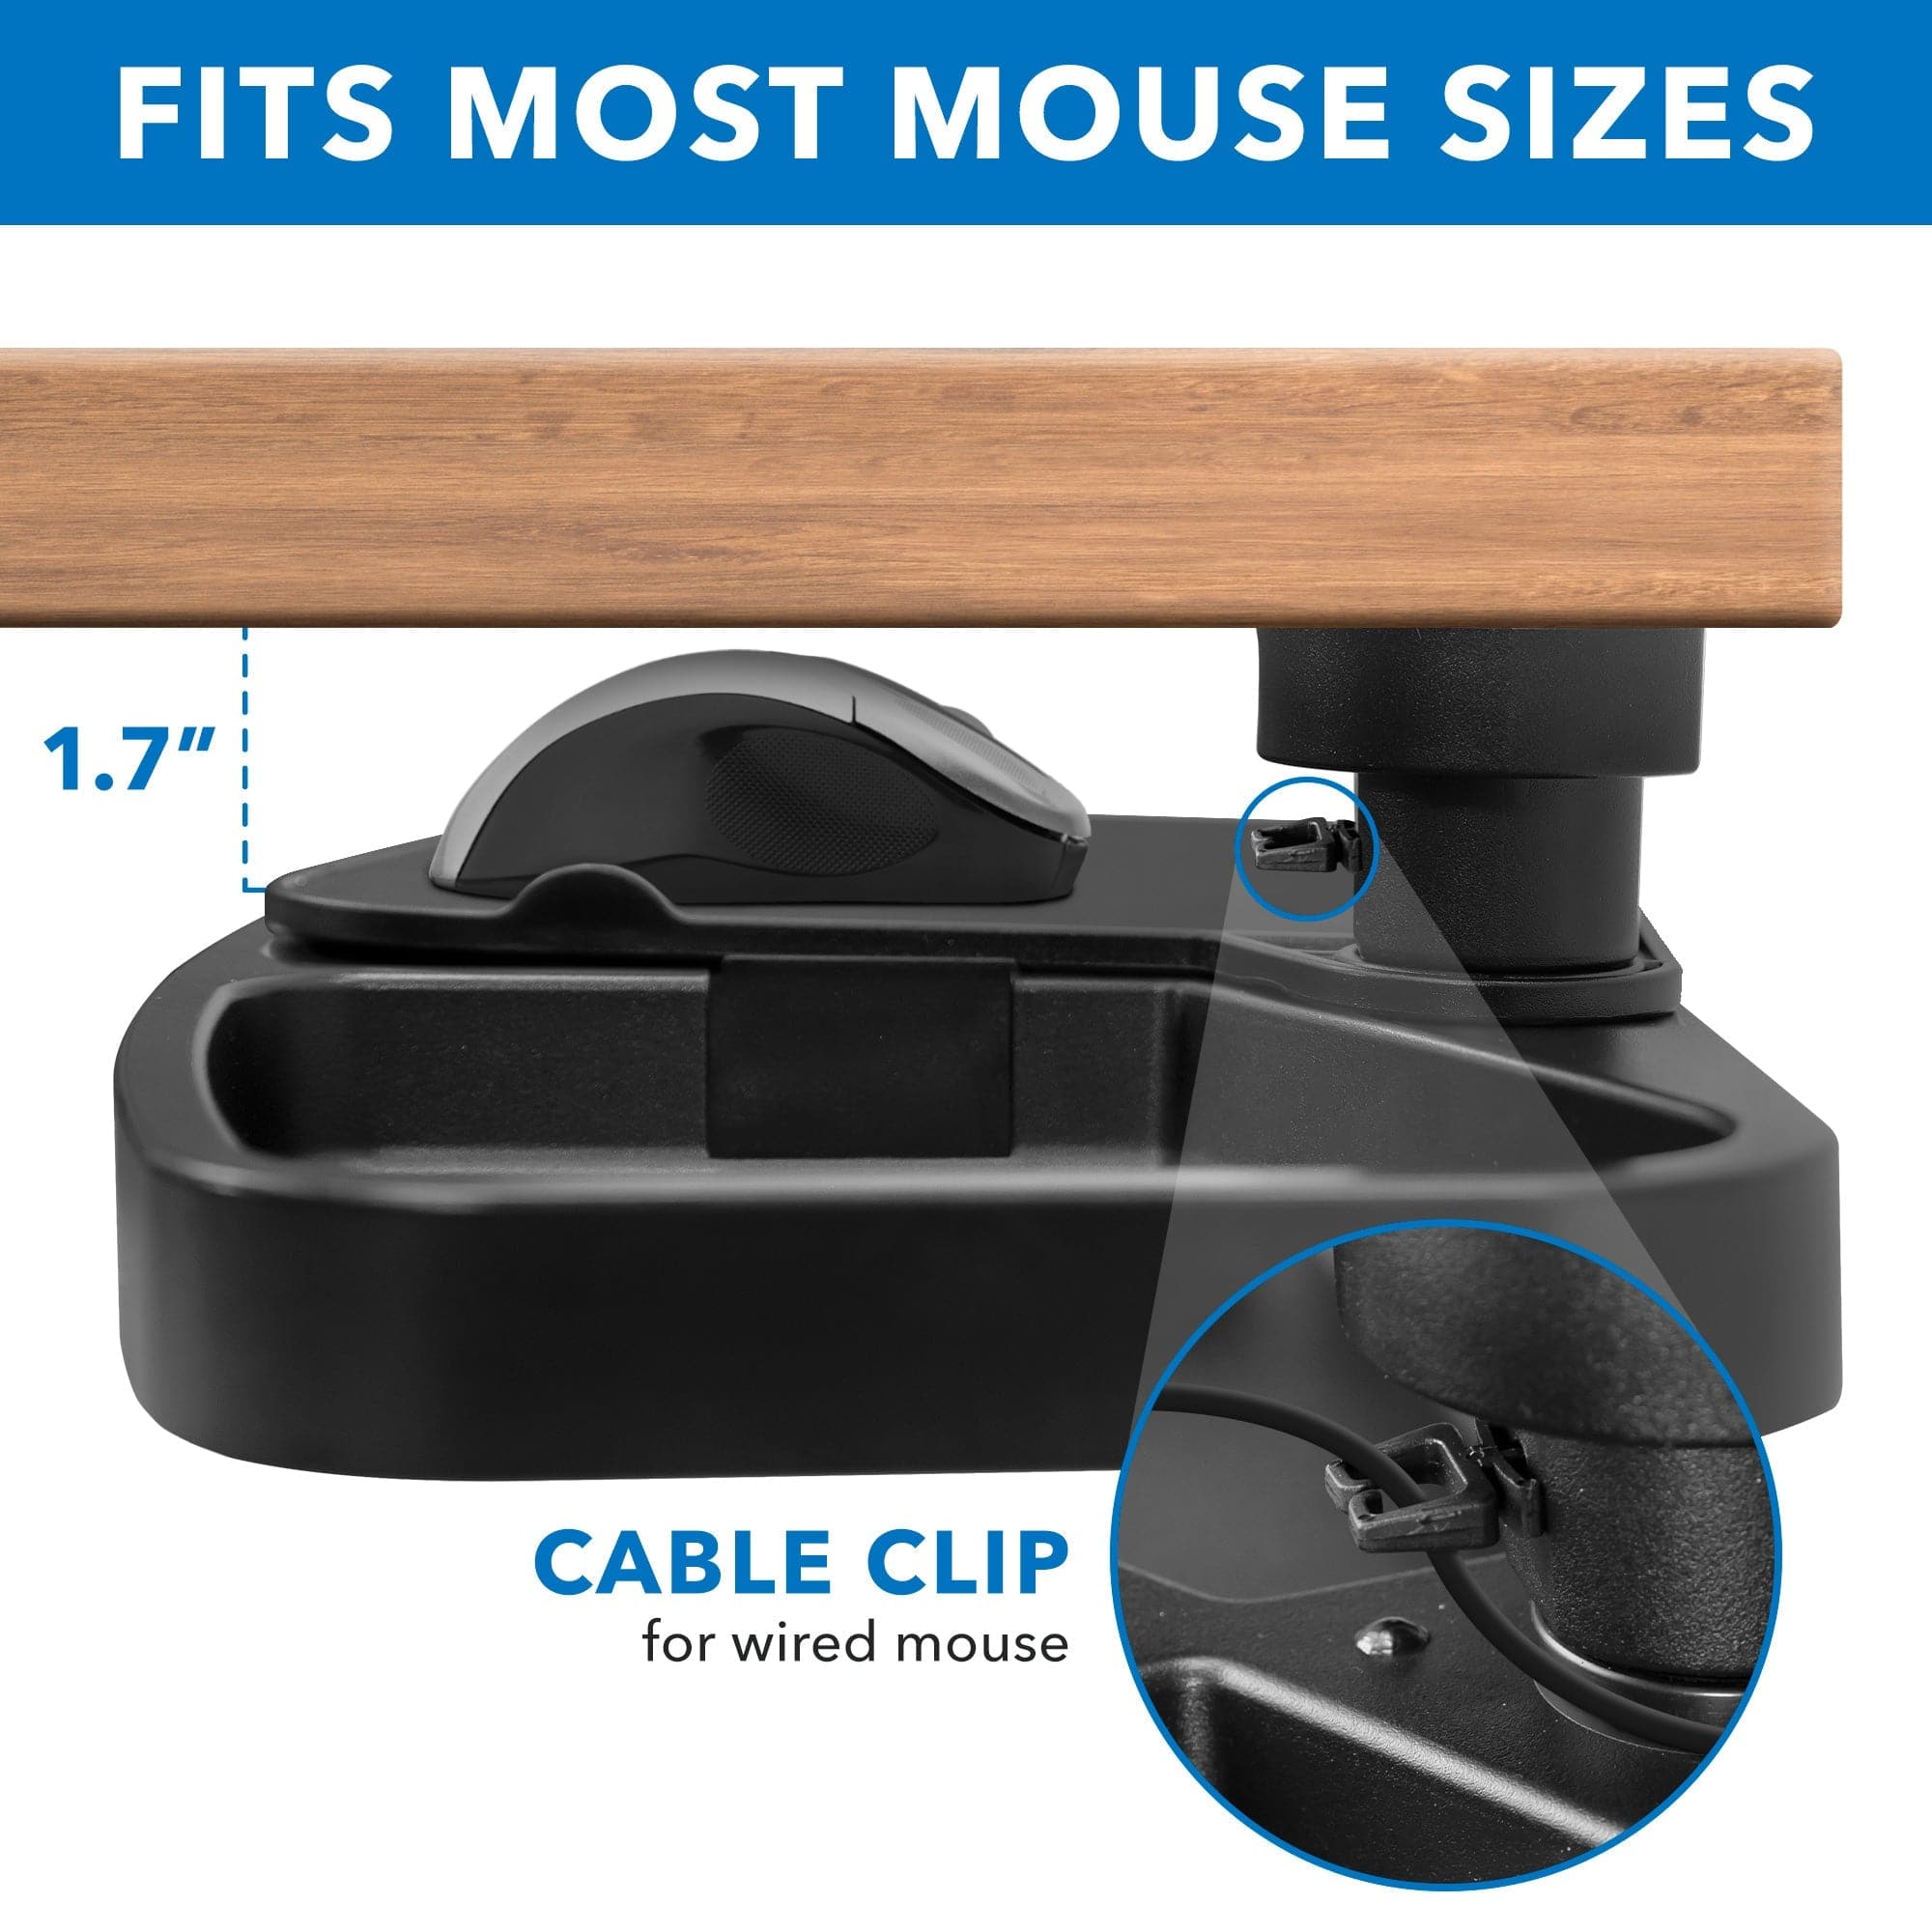 Under Desk Swivel Storage Tray with Mouse Pad - Mount-It!